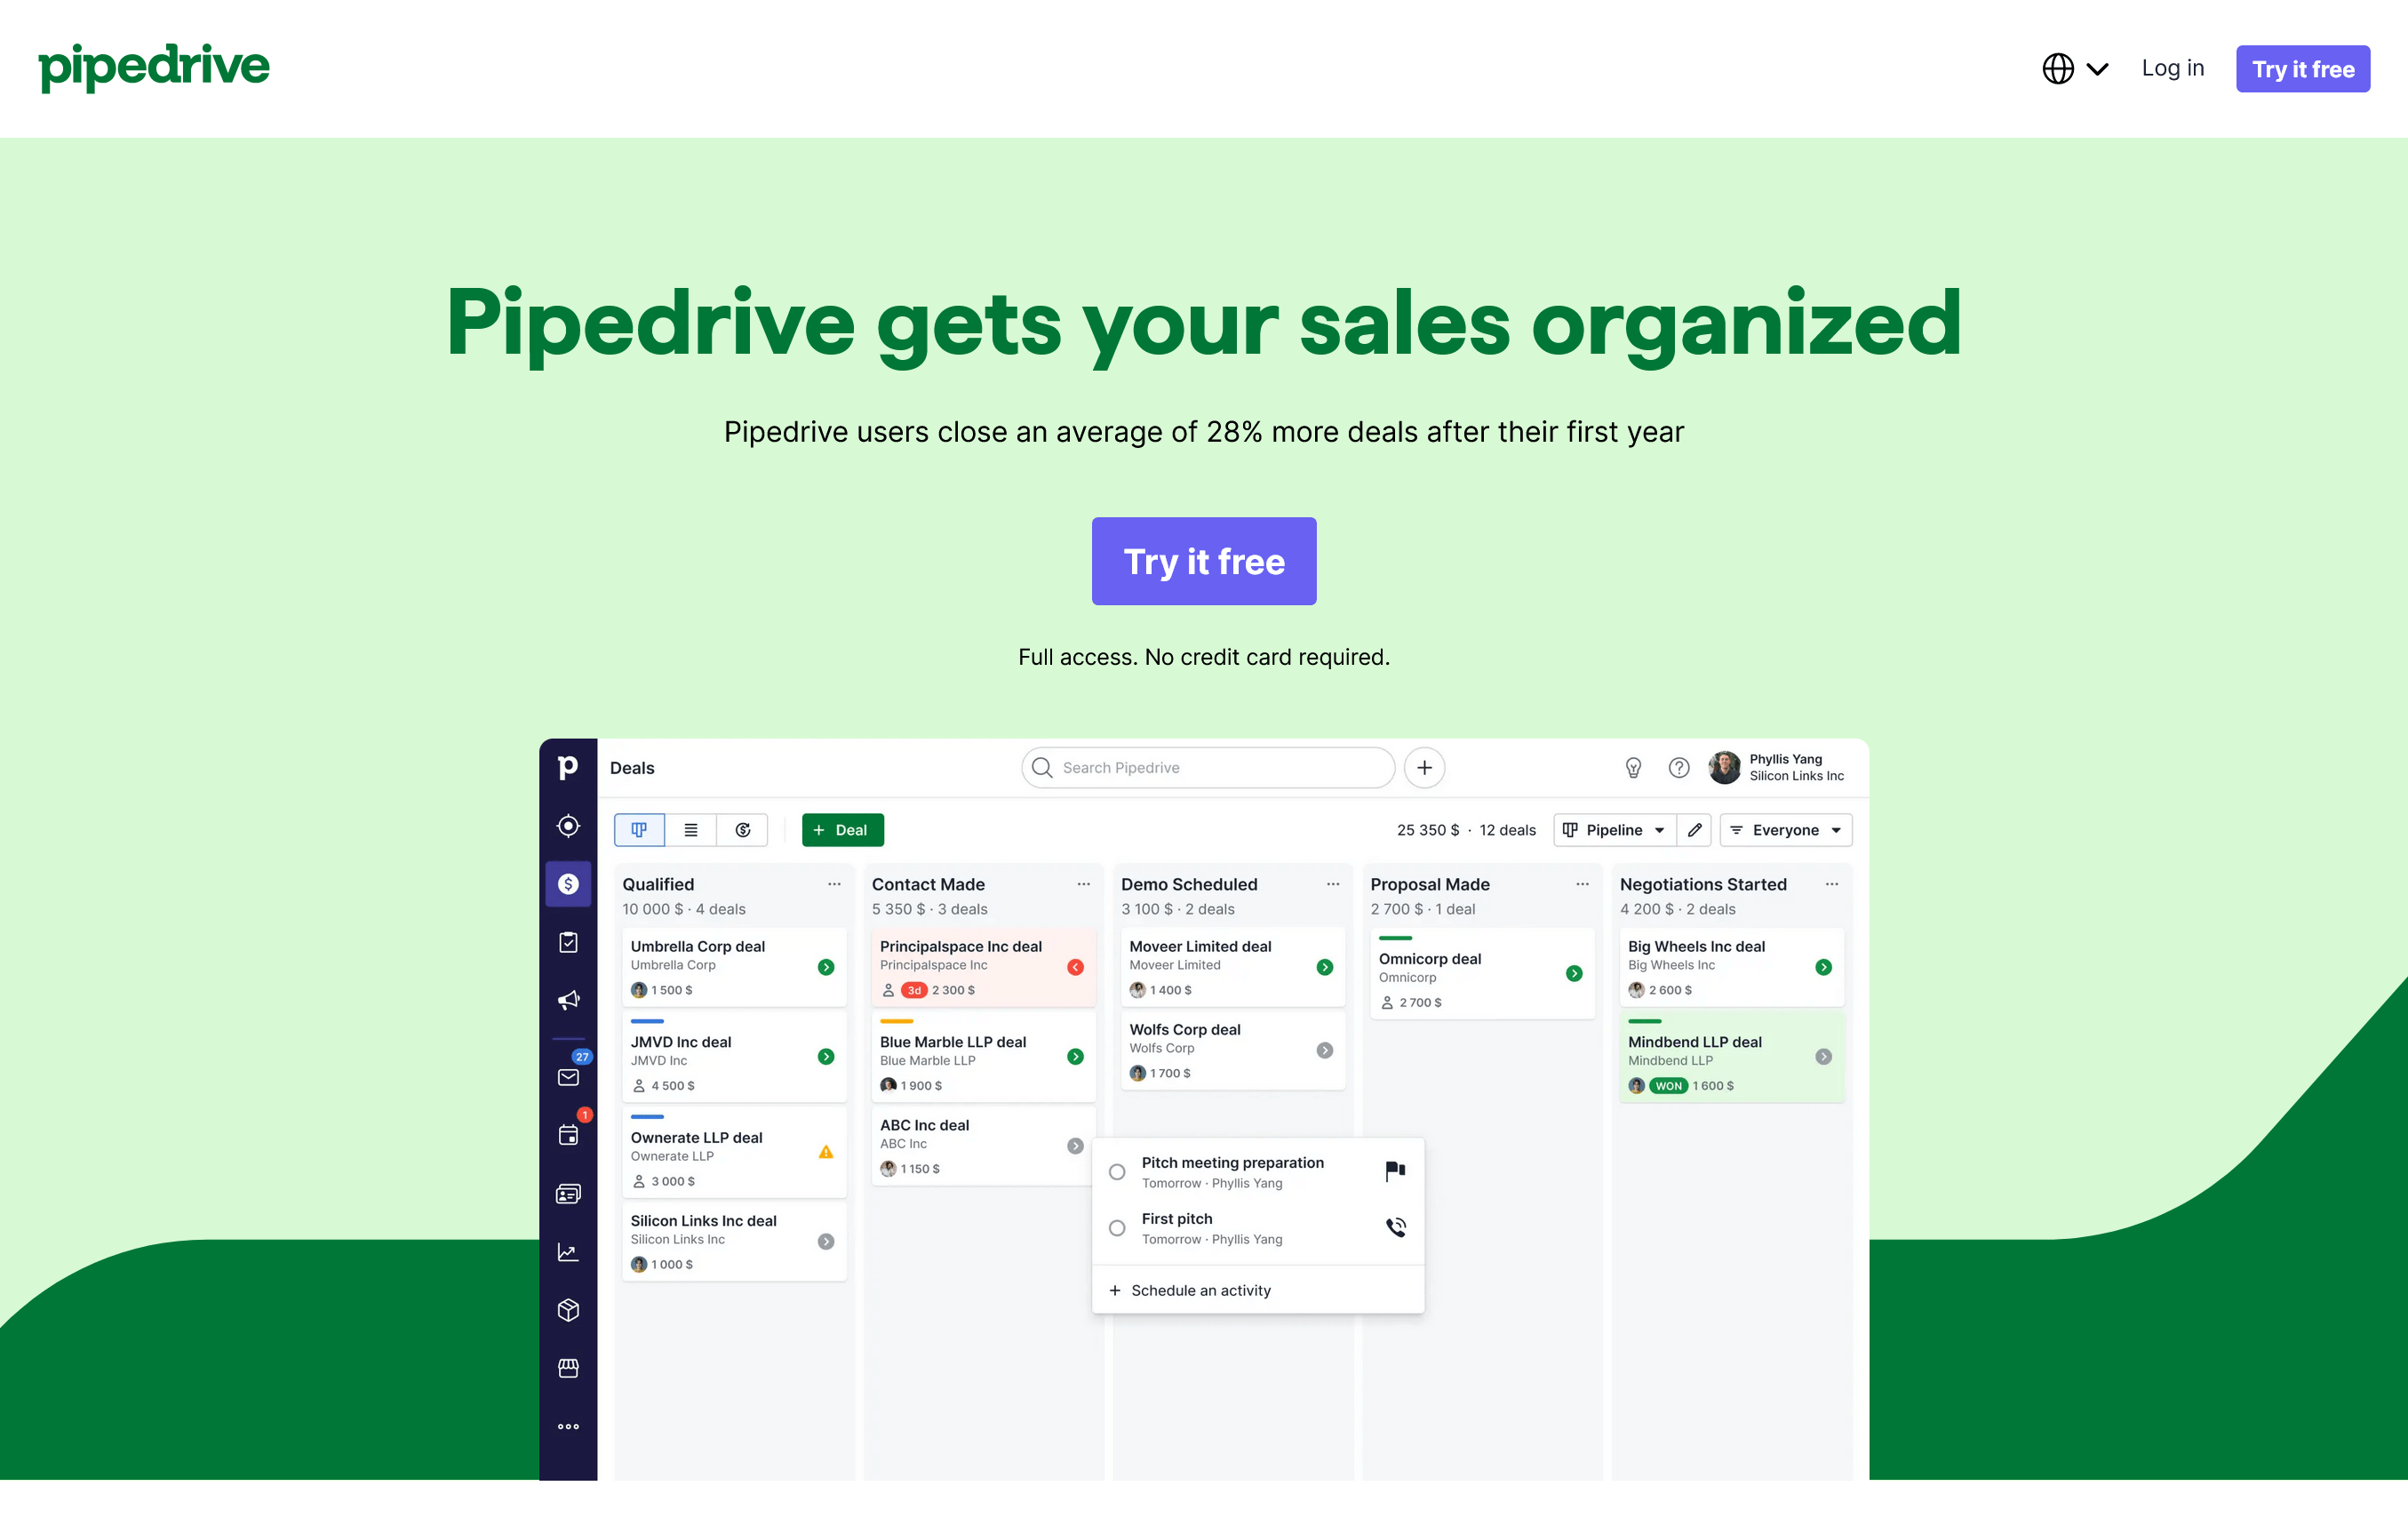 Pipedrive is a sales-focused CRM for businesses